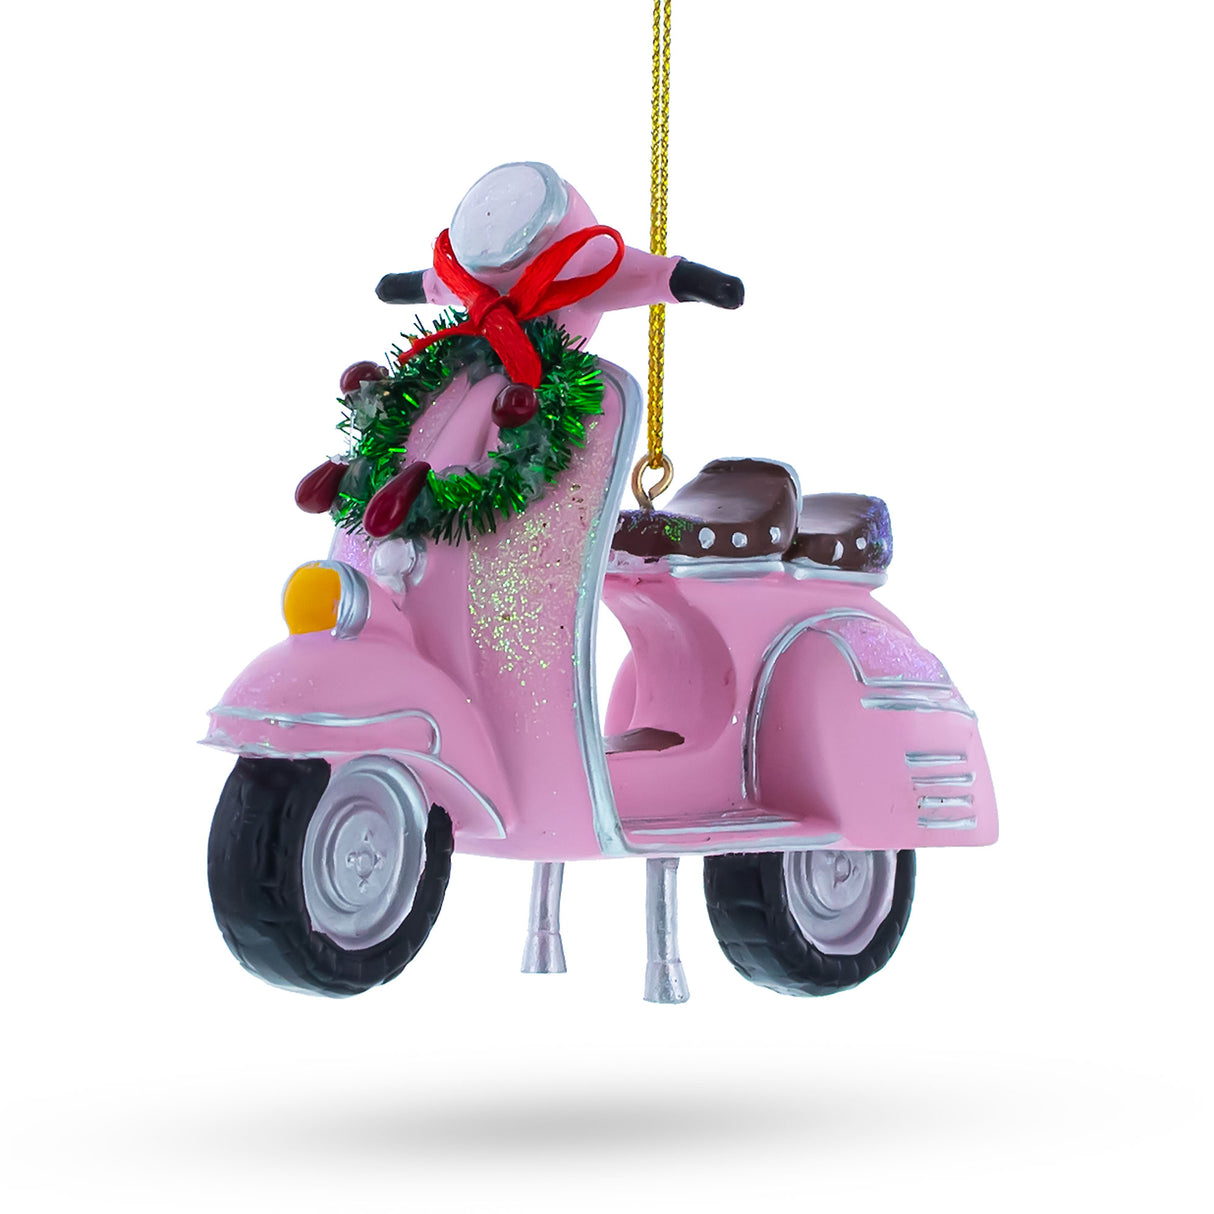 Retro Scooter with Festive Wreath - Blown Glass Christmas Ornament in Pink color,  shape